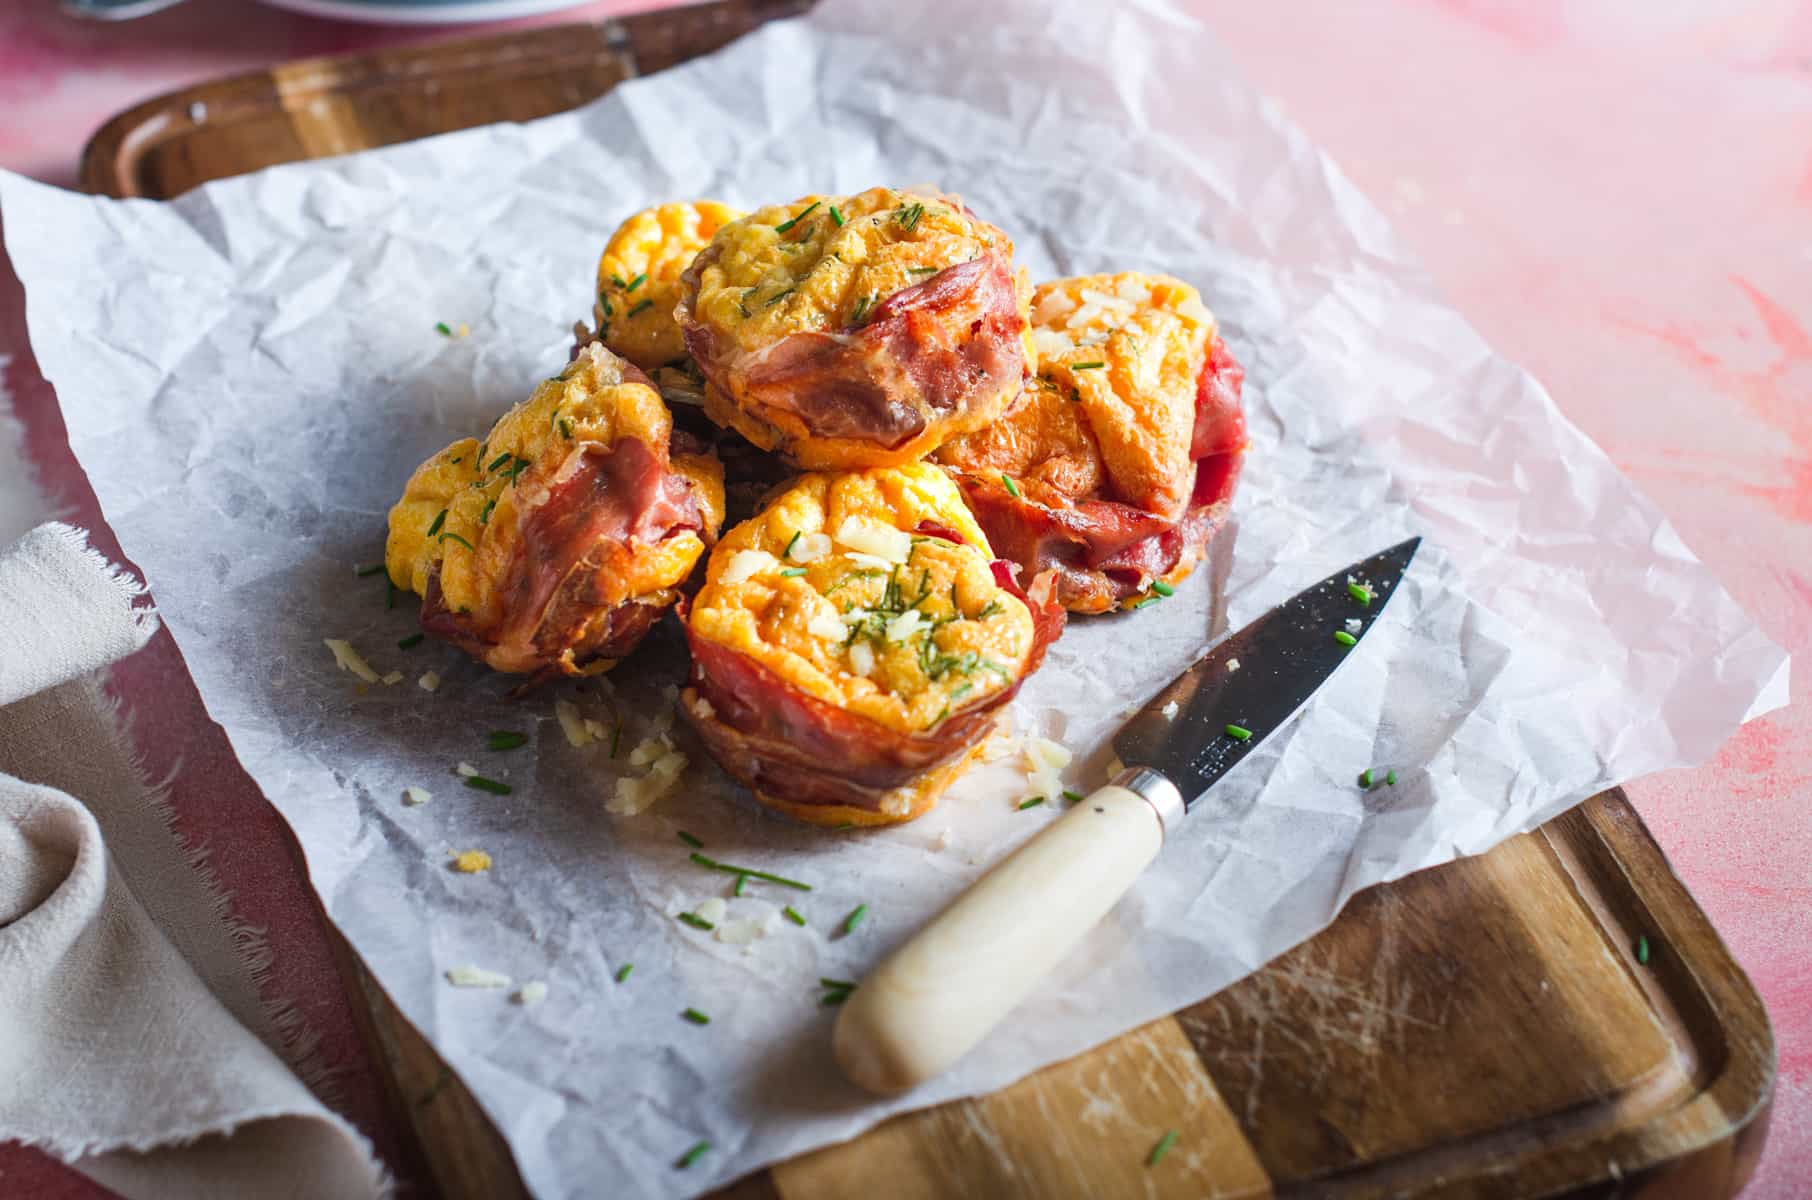 Parma ham and scrambled egg muffins piled on a wooden board for serving.